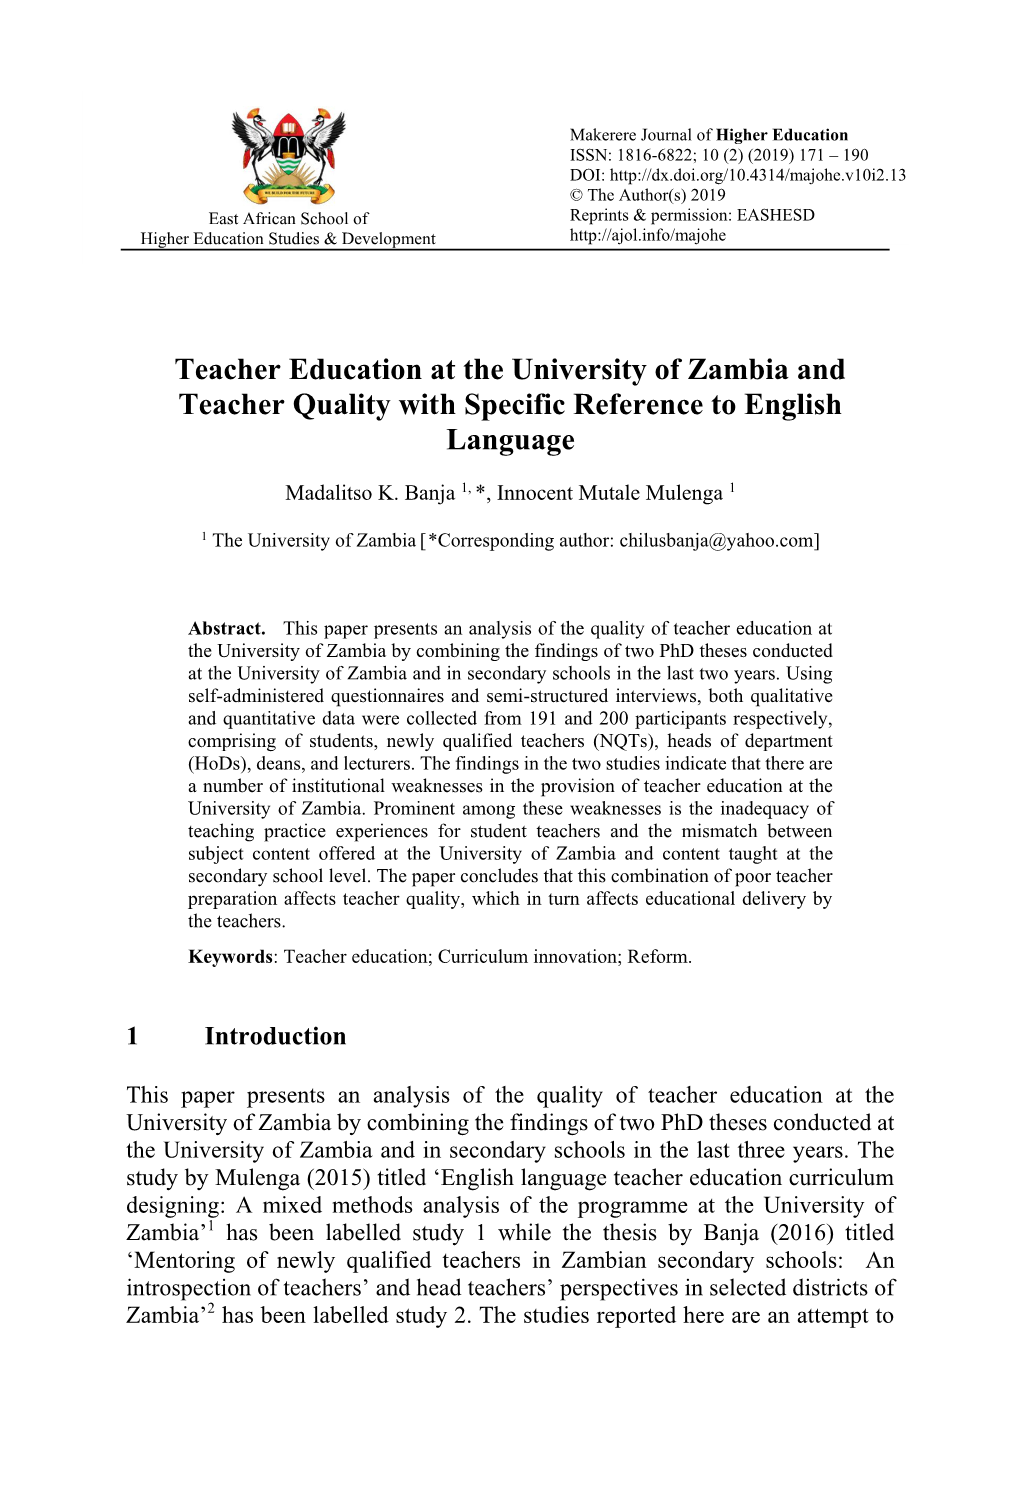 Teacher Education at the University of Zambia and Teacher Quality With